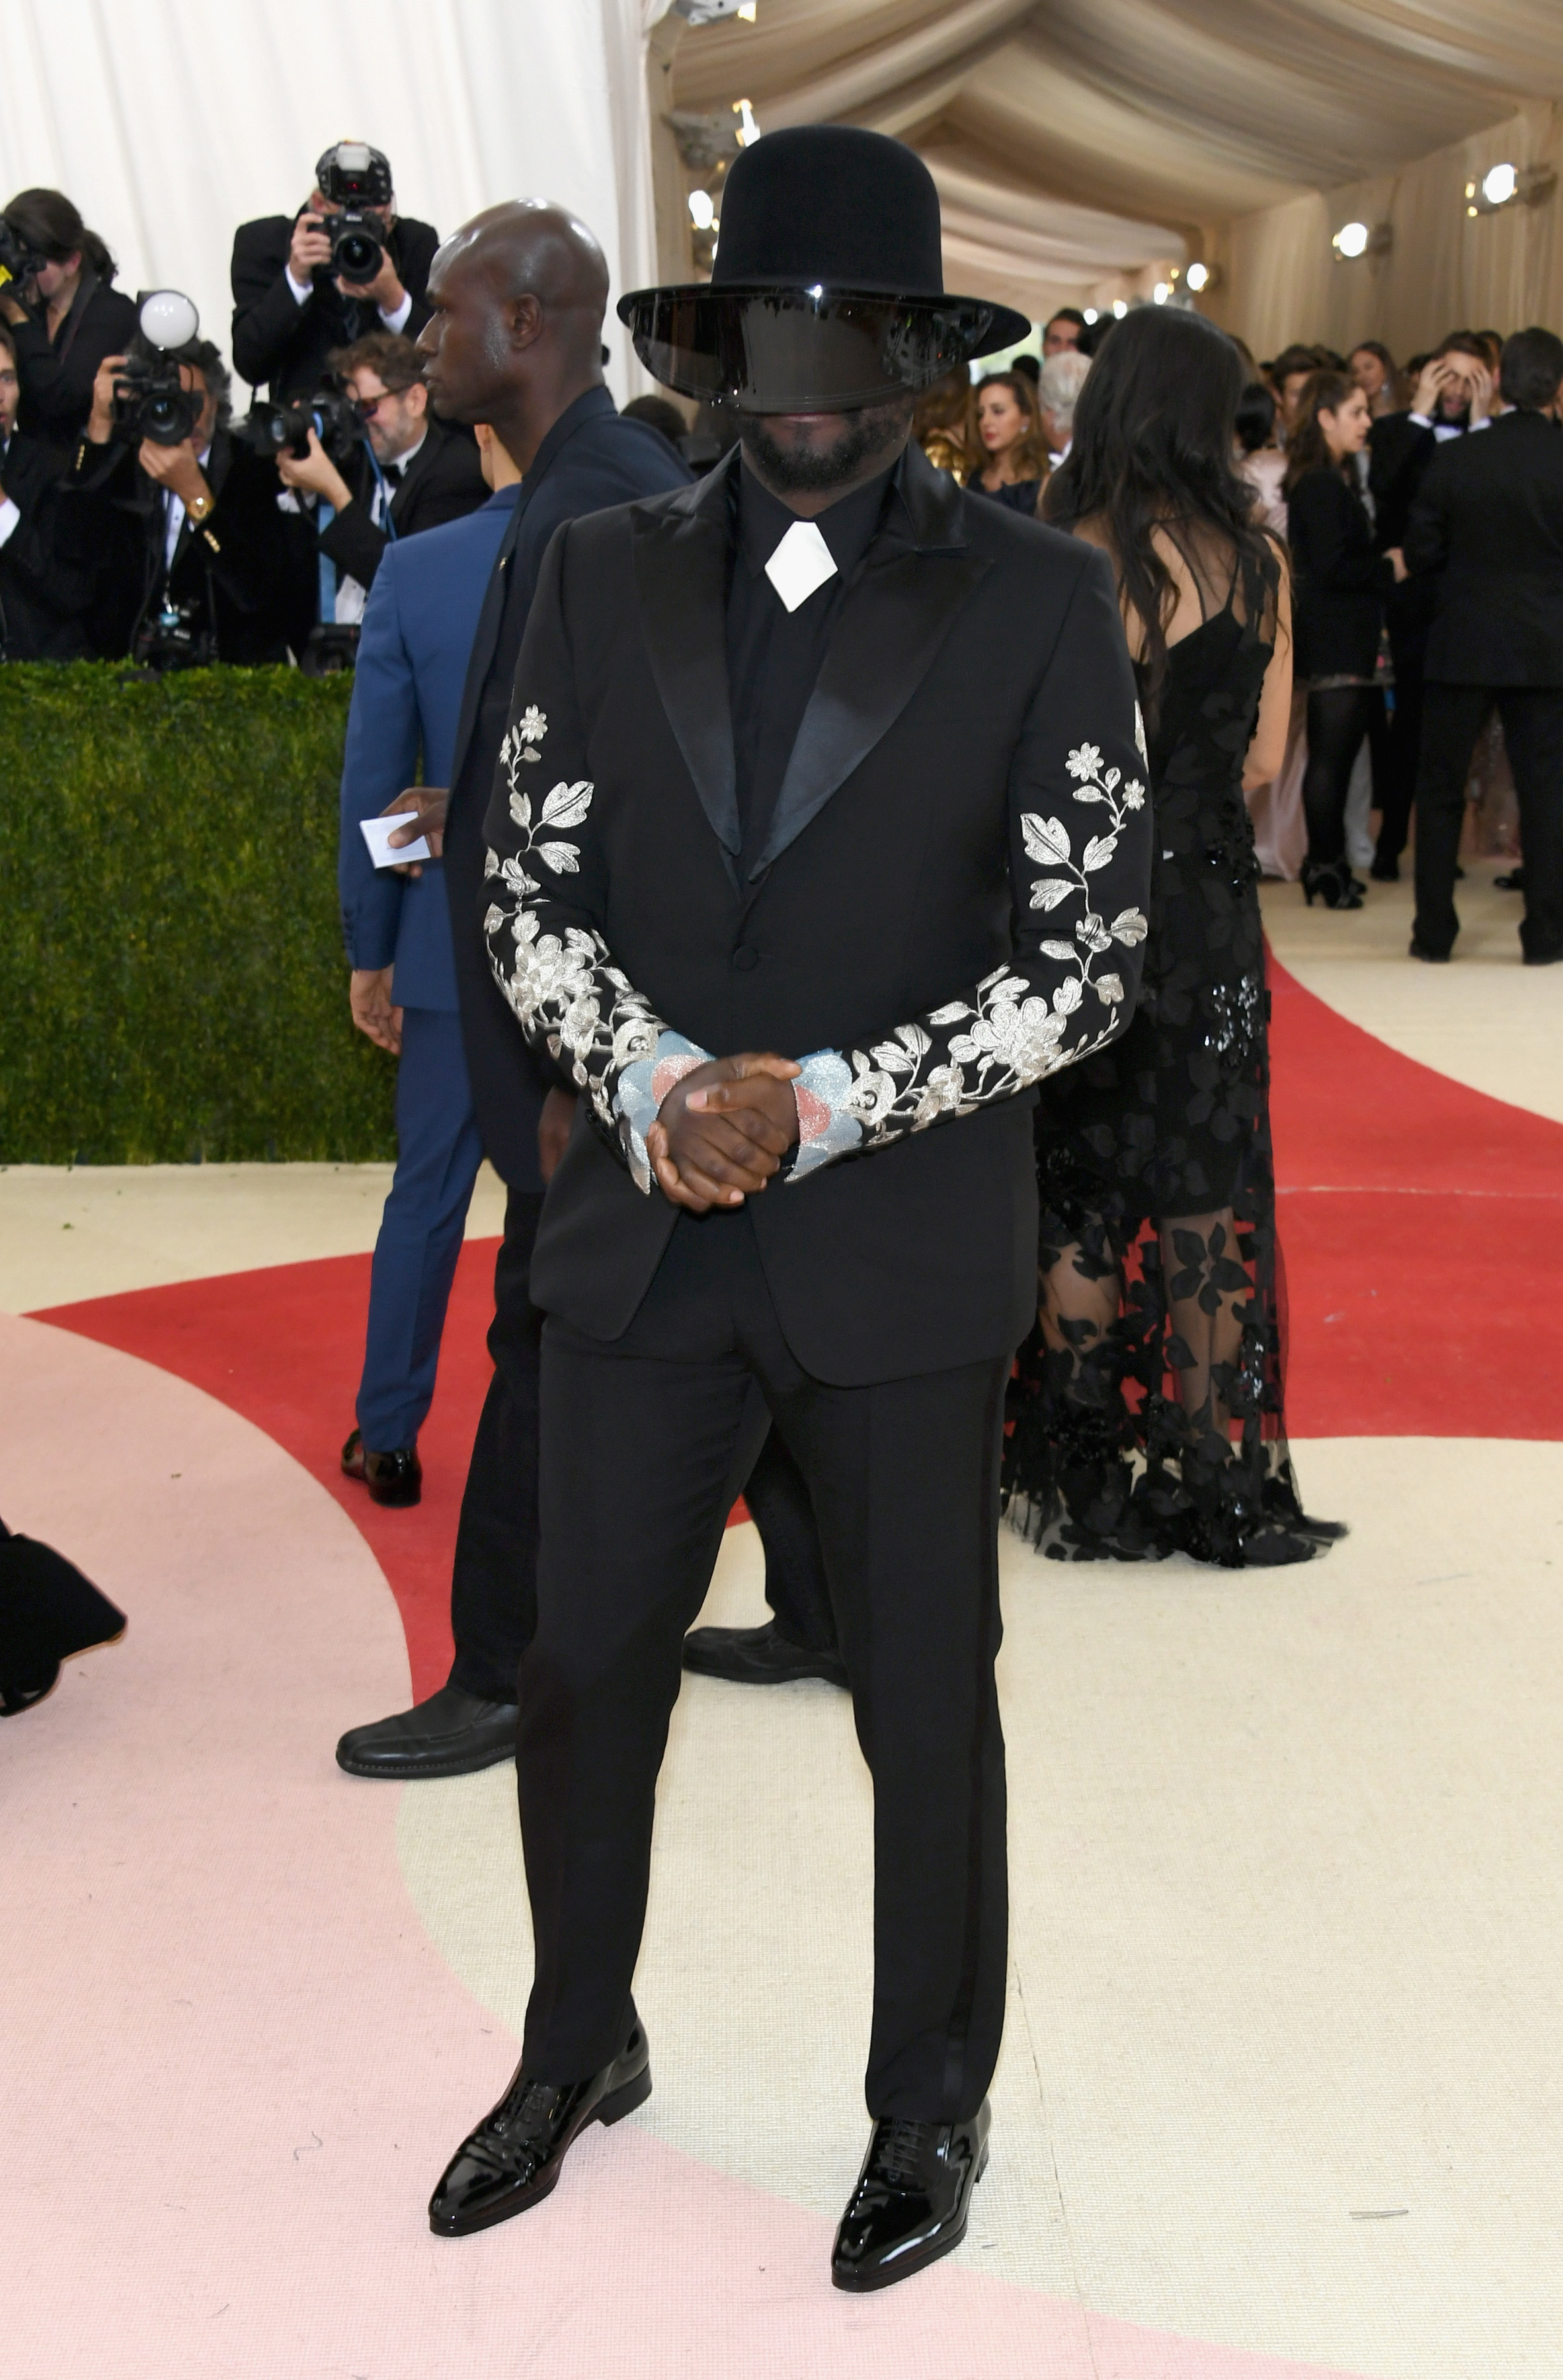 will.i.am attends  Manus x Machina: Fashion In An Age Of Technology  Costume Institute Gala at Metropolitan Museum of Art on May 2, 2016 in New York City.